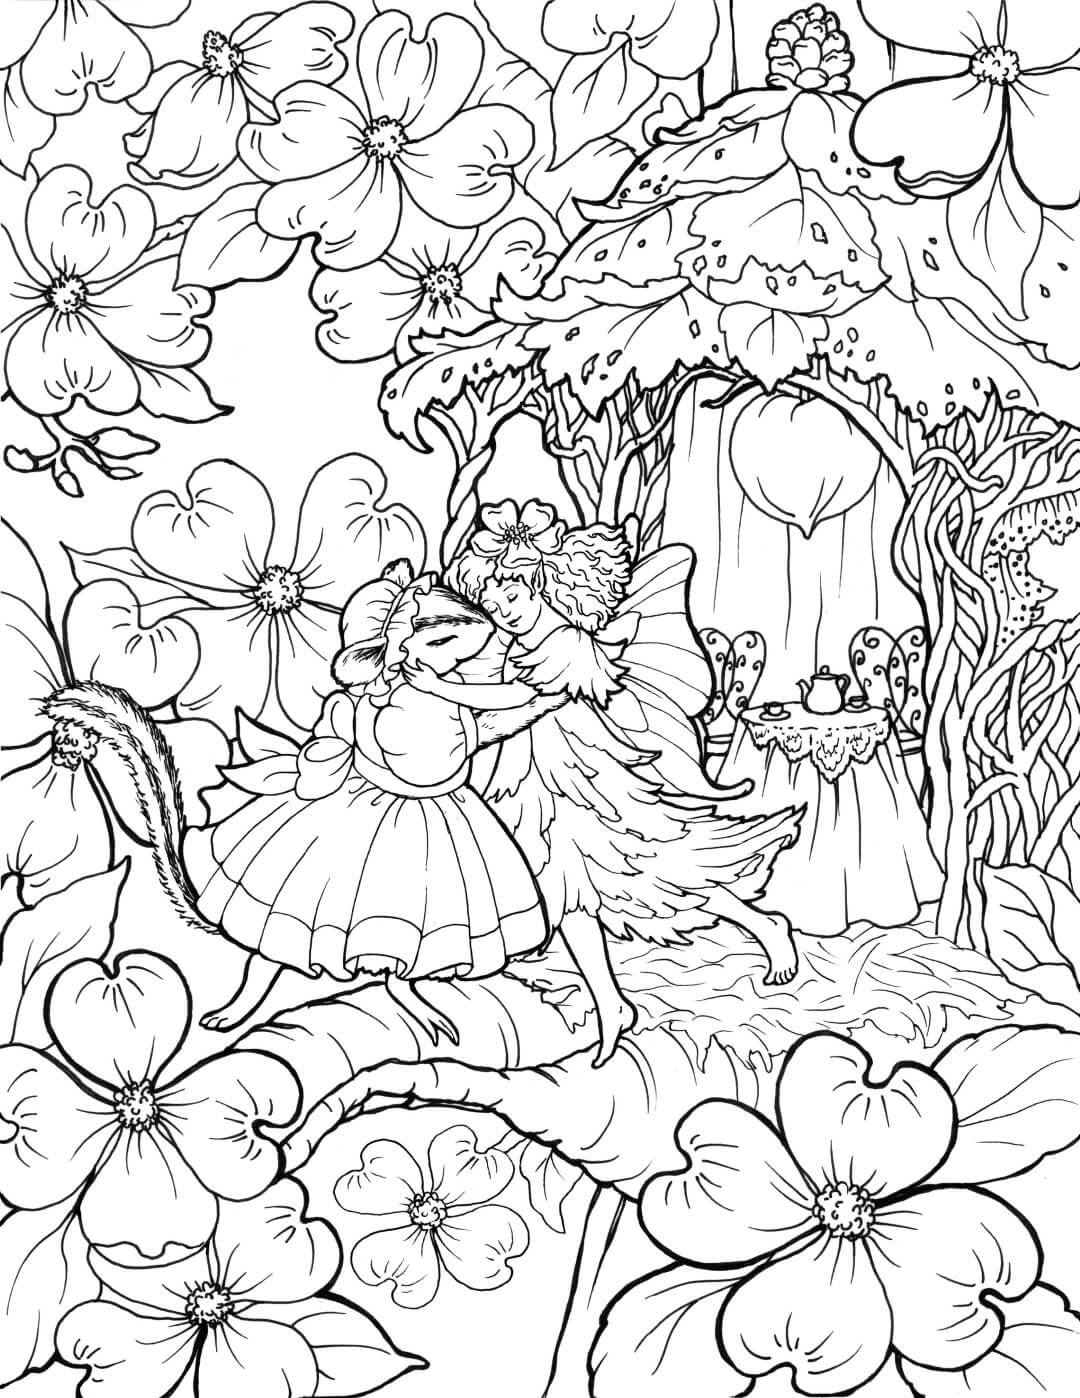 Fairy and Mouse Dance Coloring Page